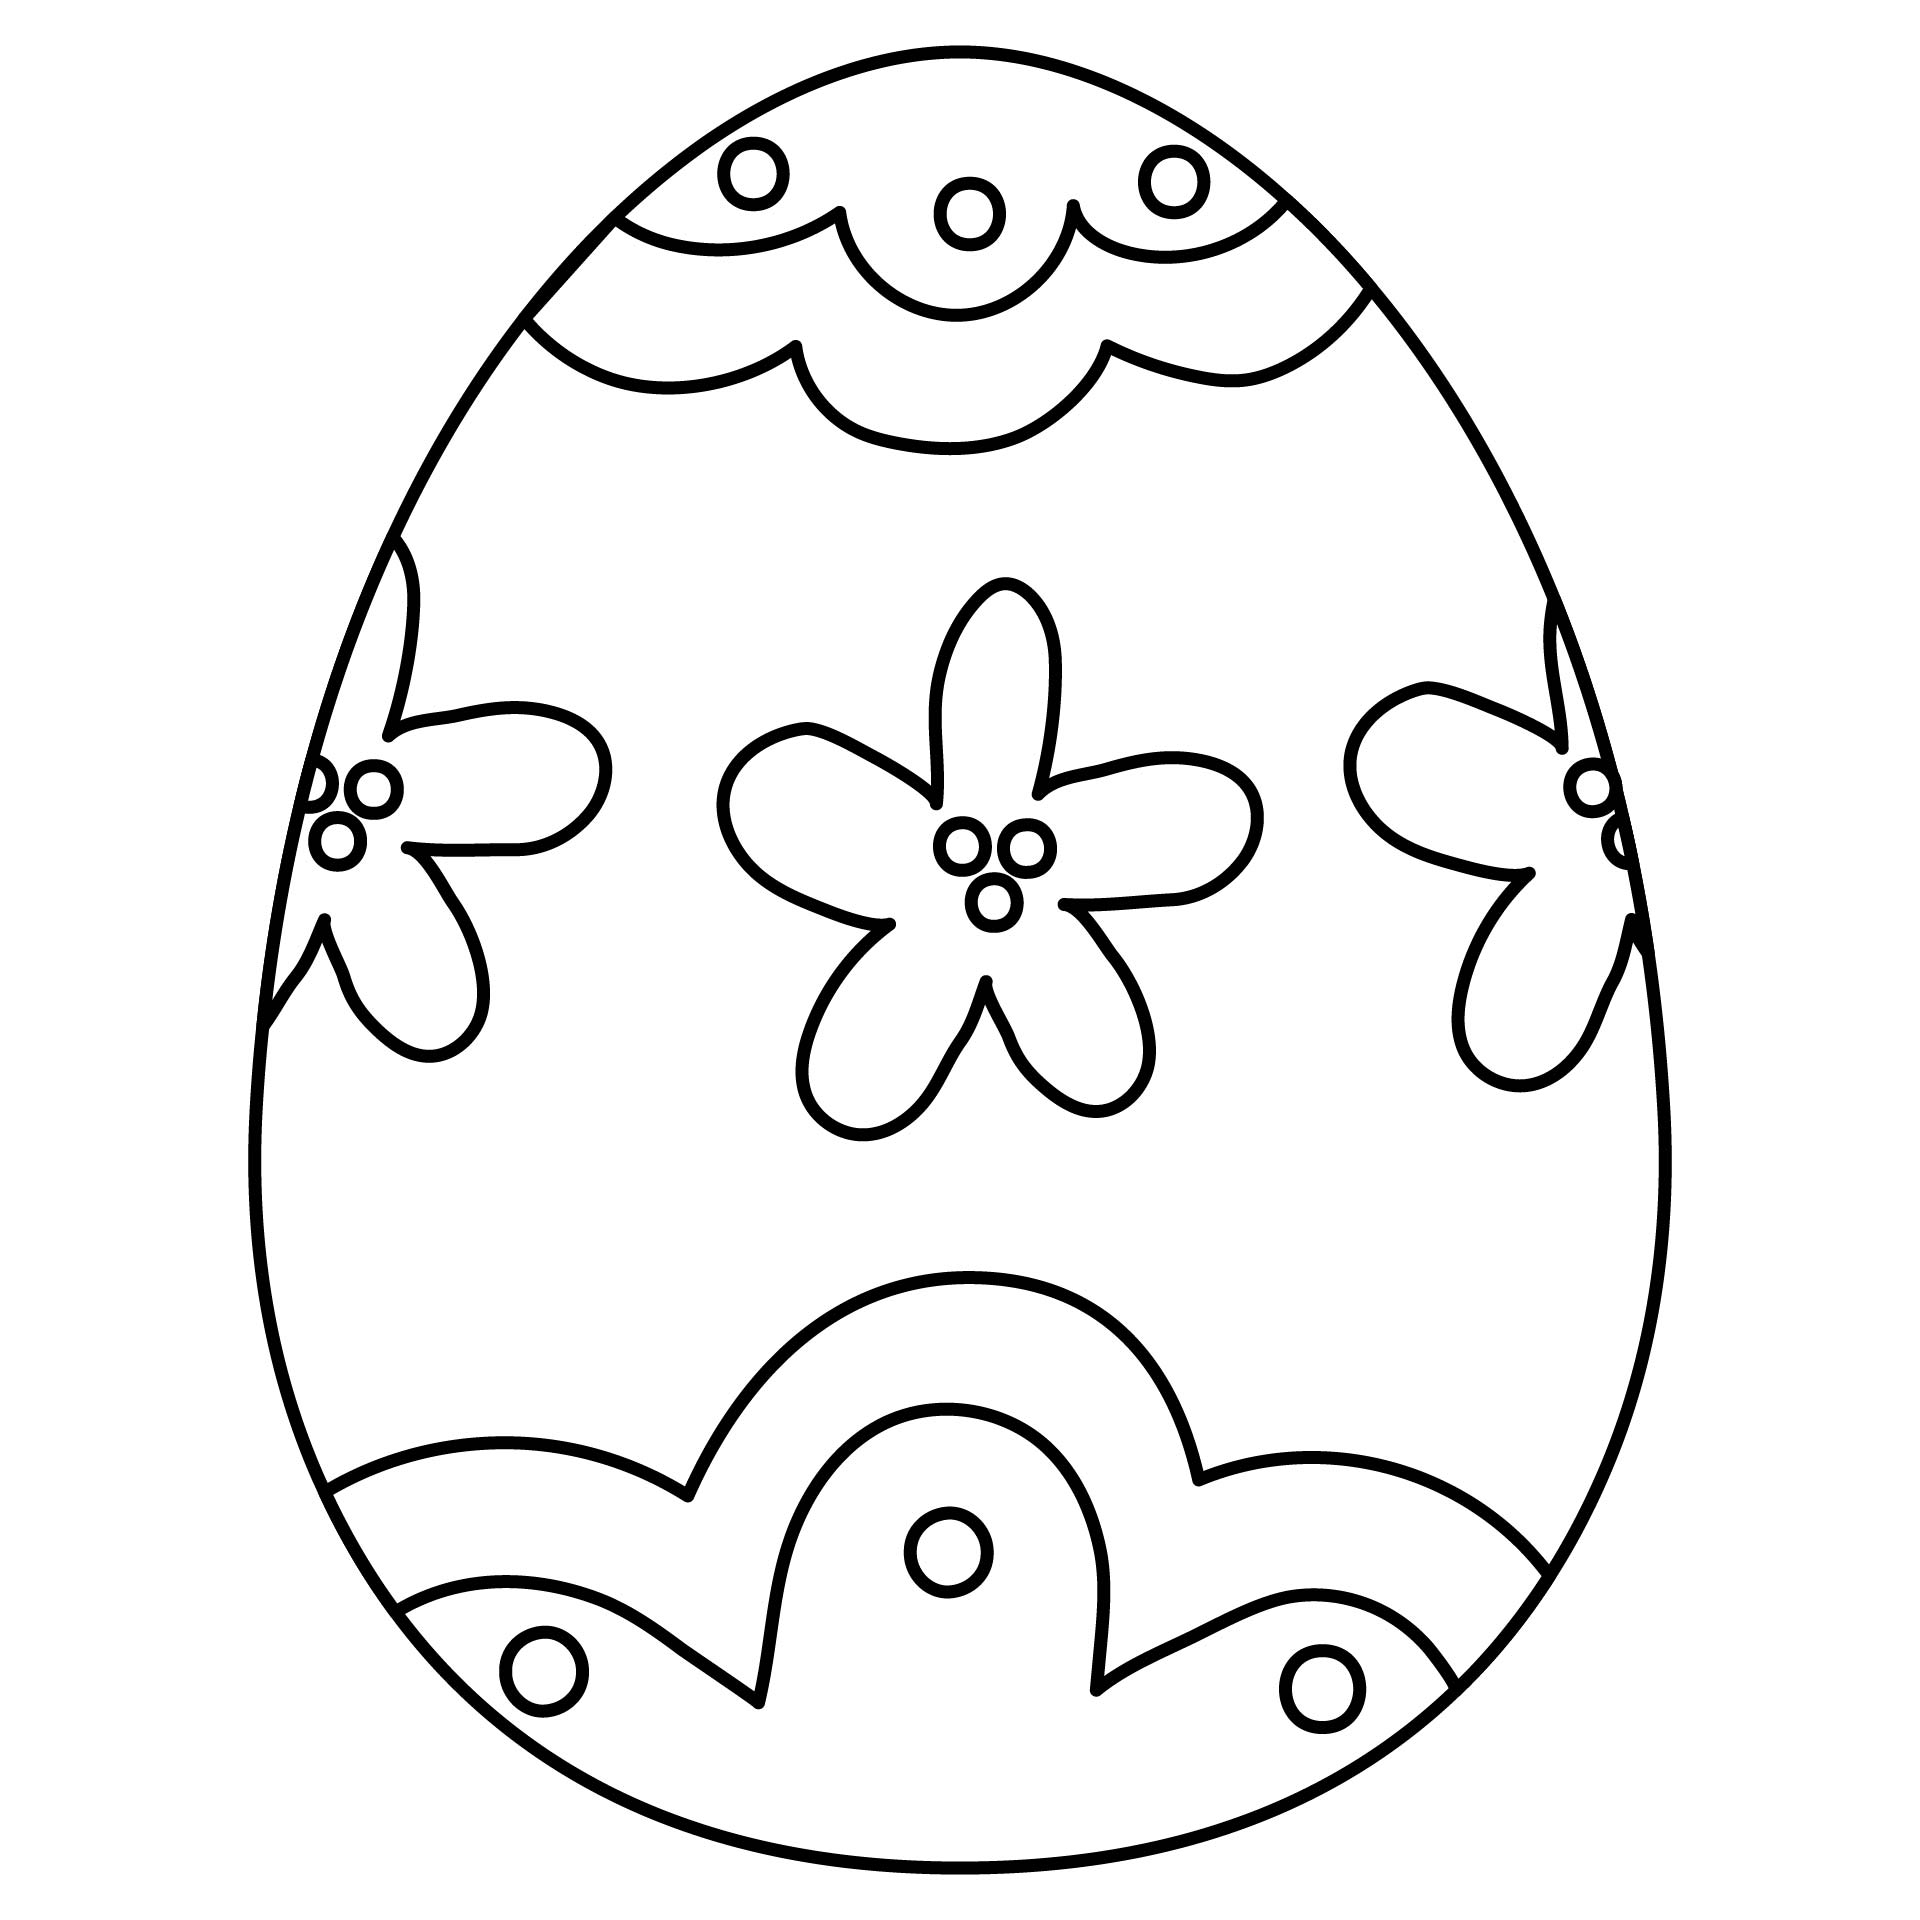 Color Easter Egg Design Coloring Pages